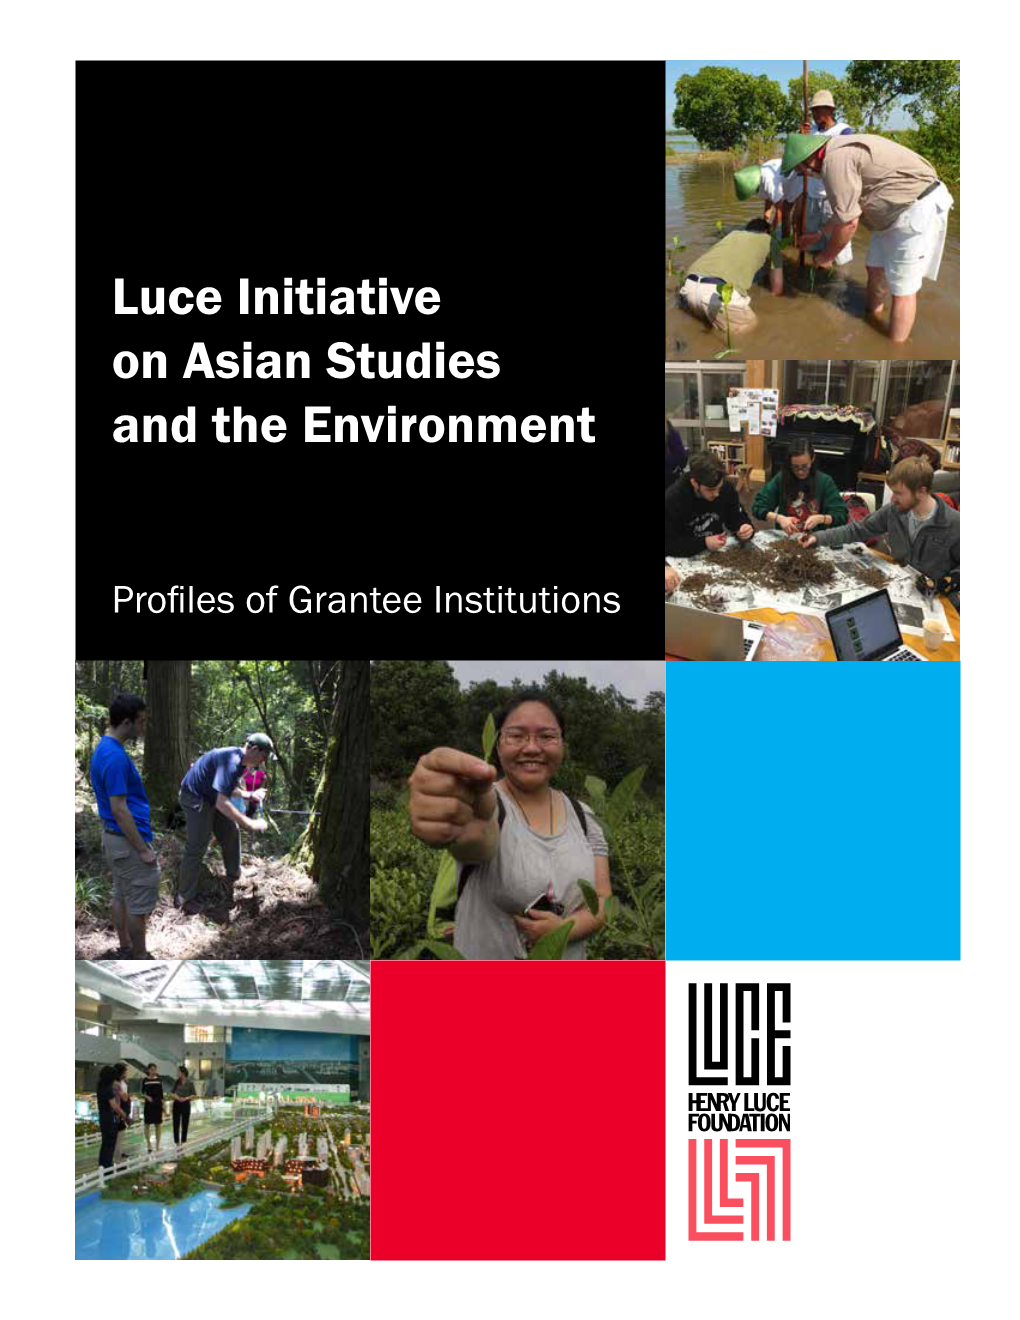 Luce Initiative on Asian Studies and the Environment